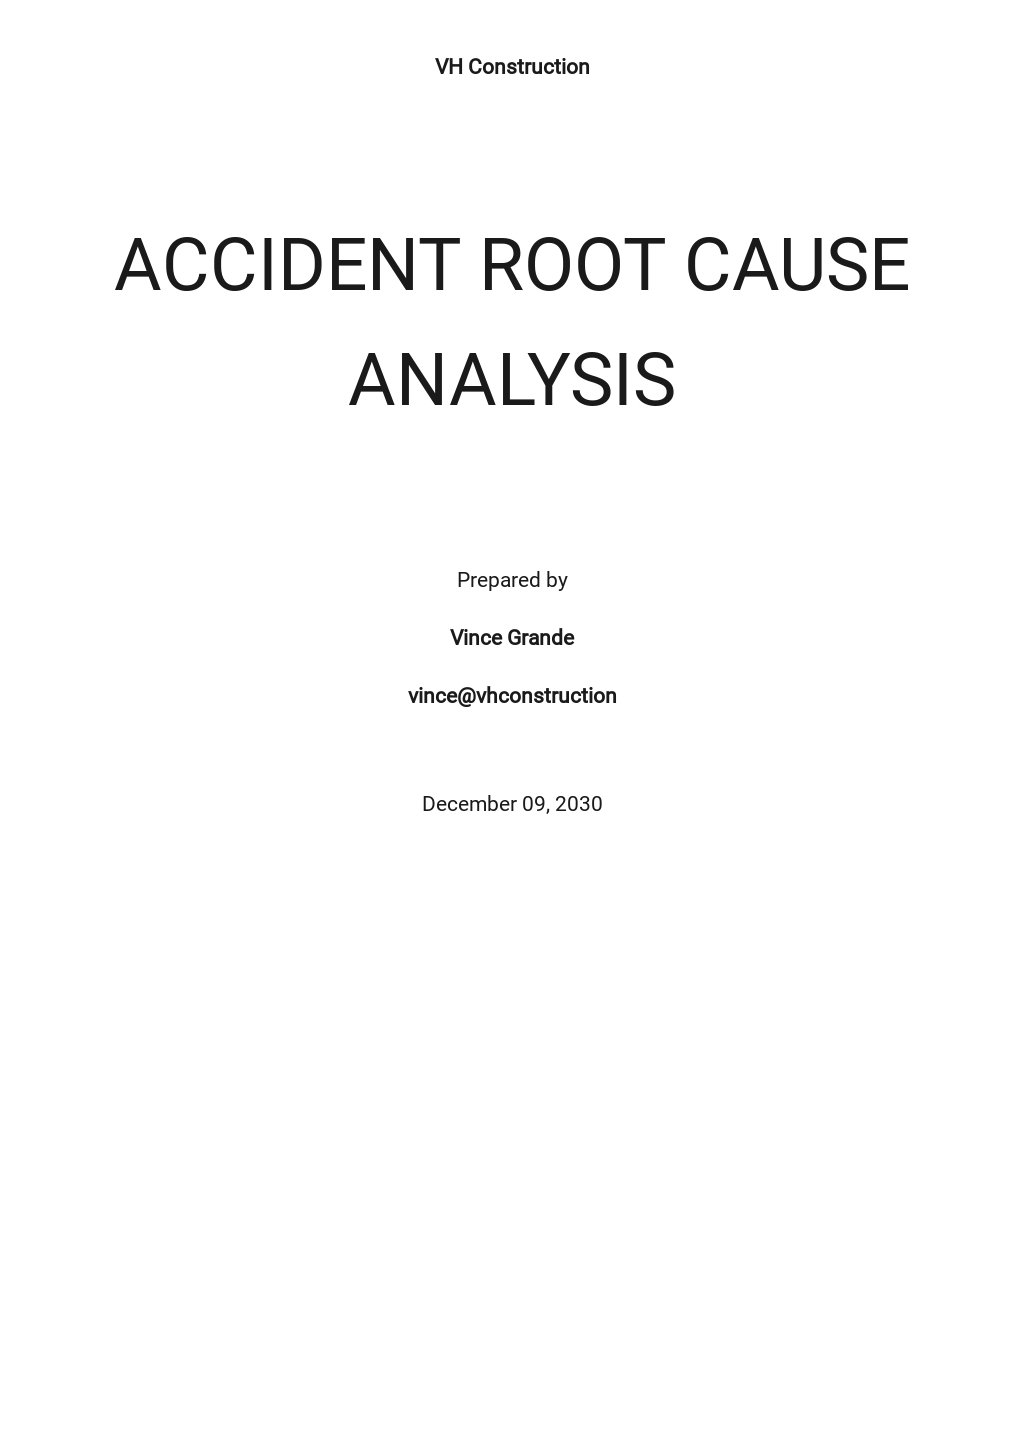 Accident Root Cause Analysis Template.jpe